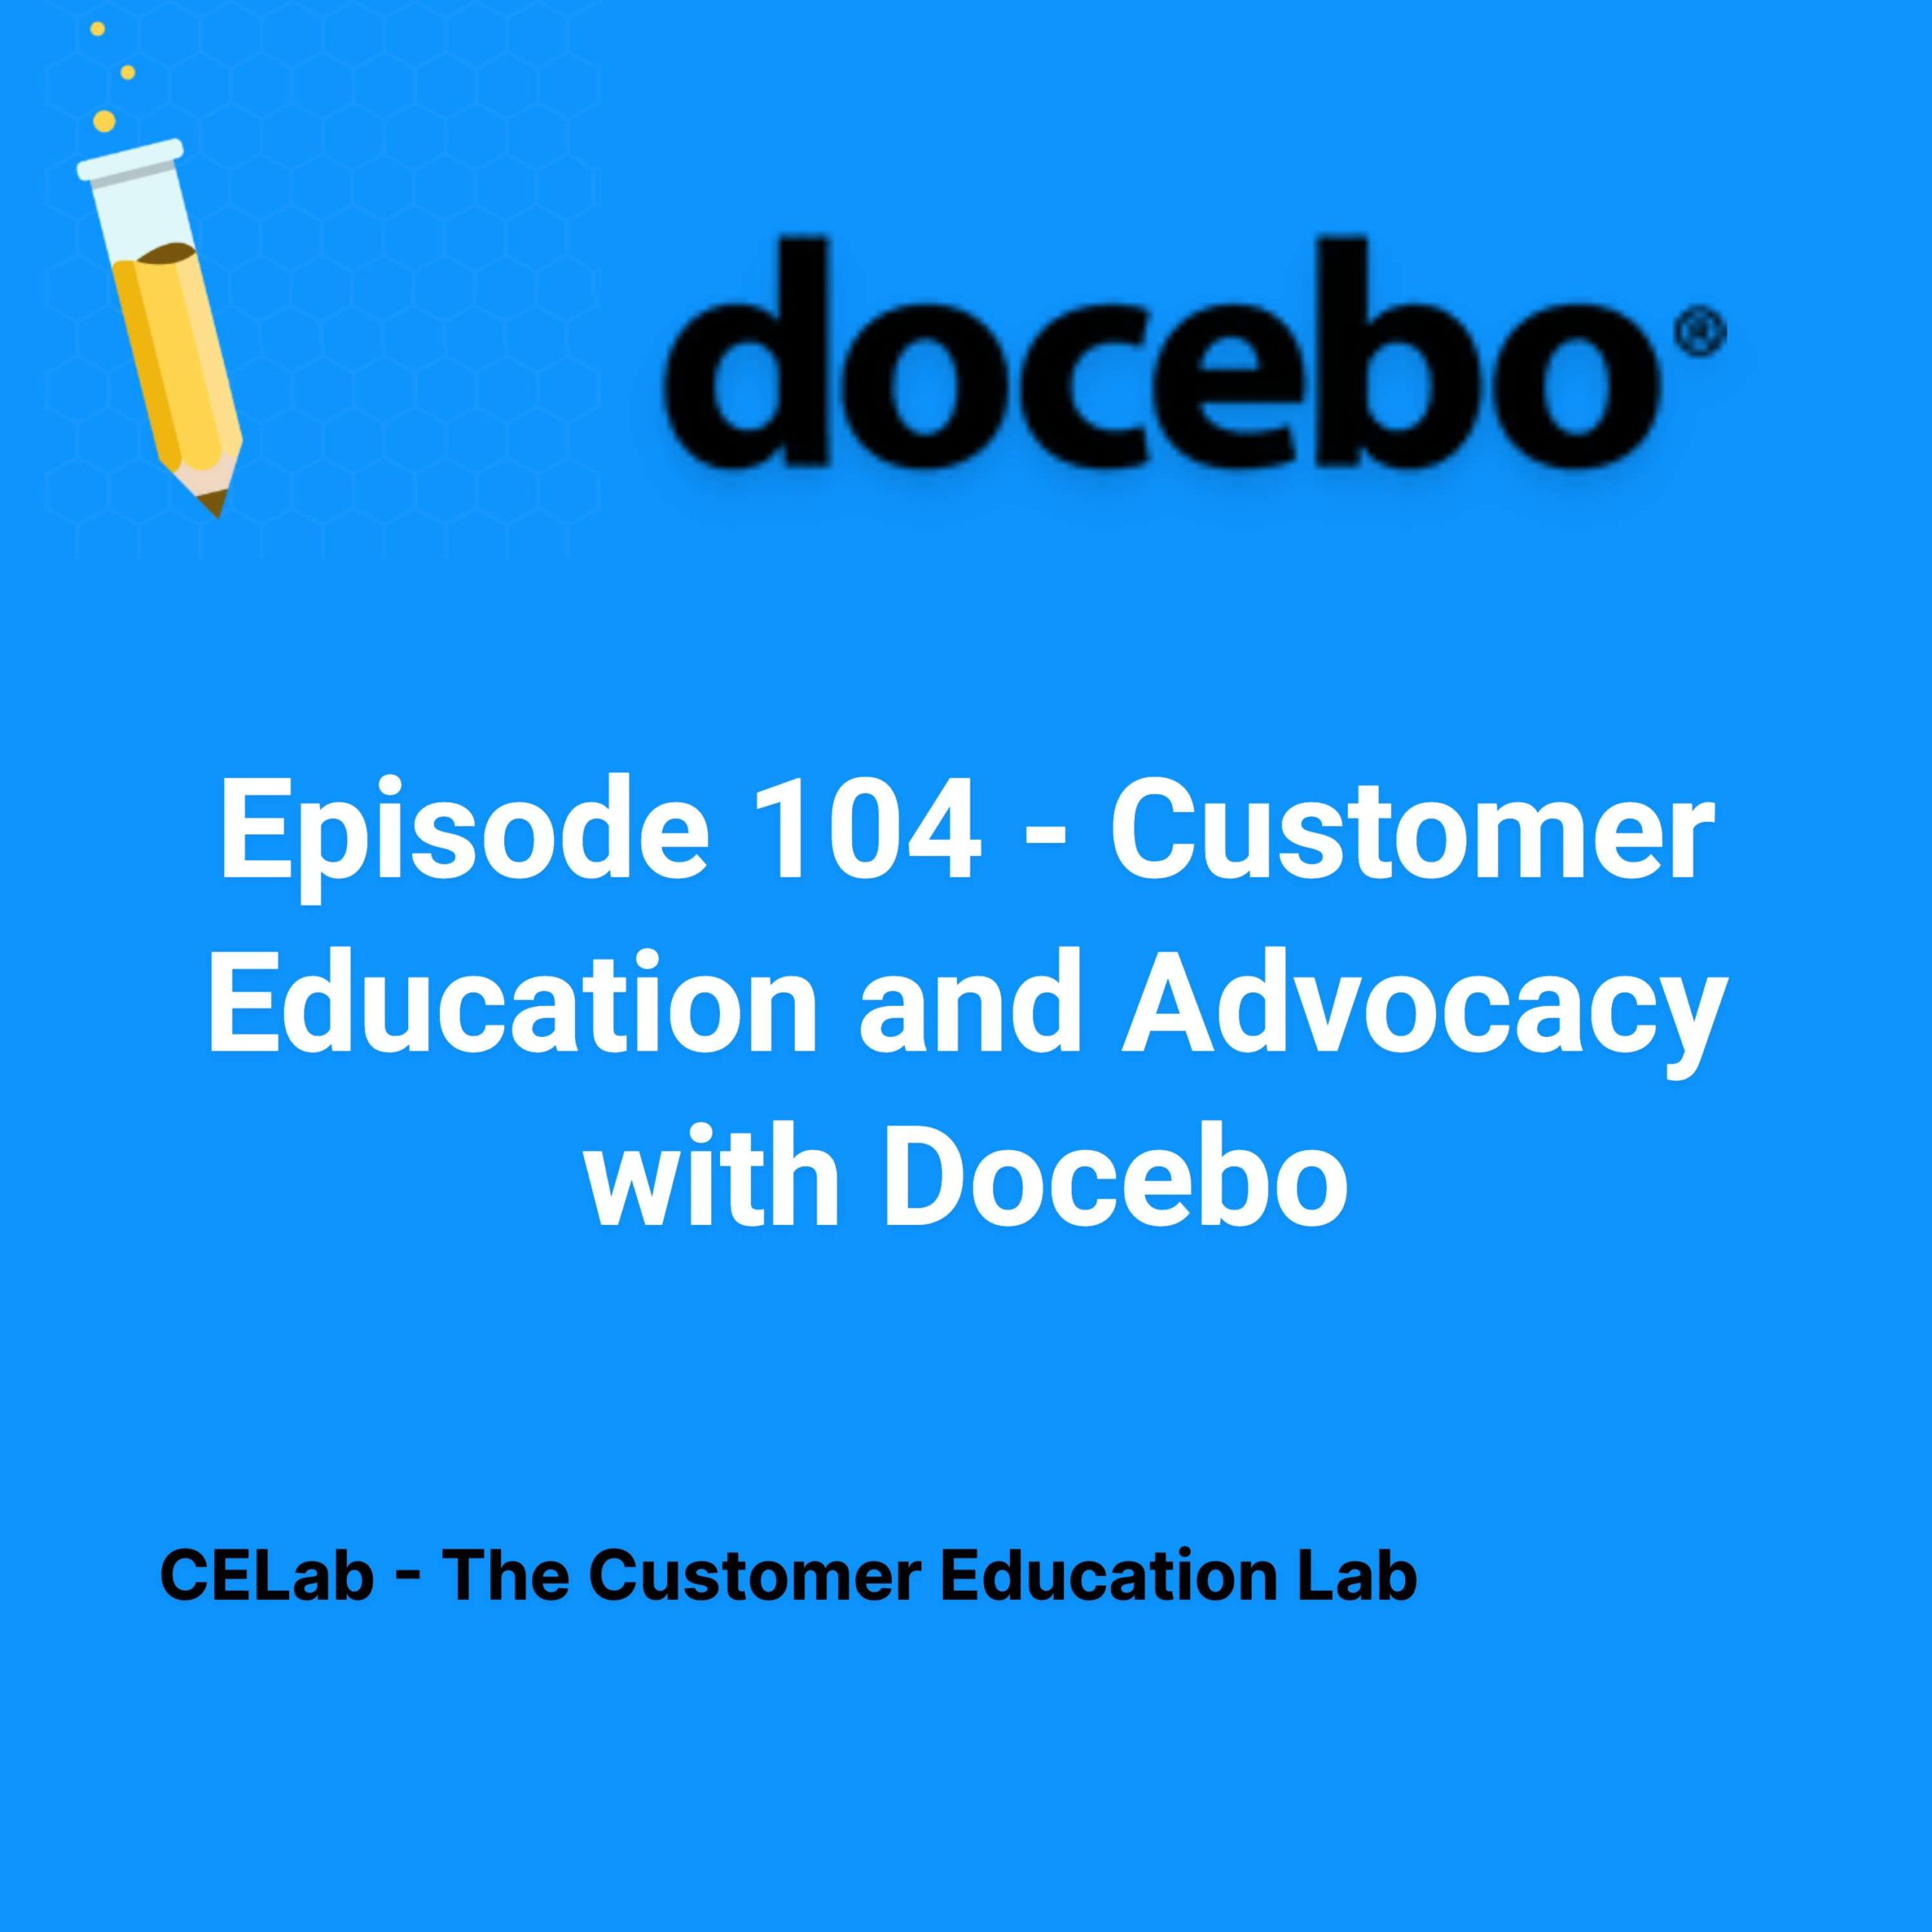 Episode 104 - Customer Education and Advocacy with Docebo